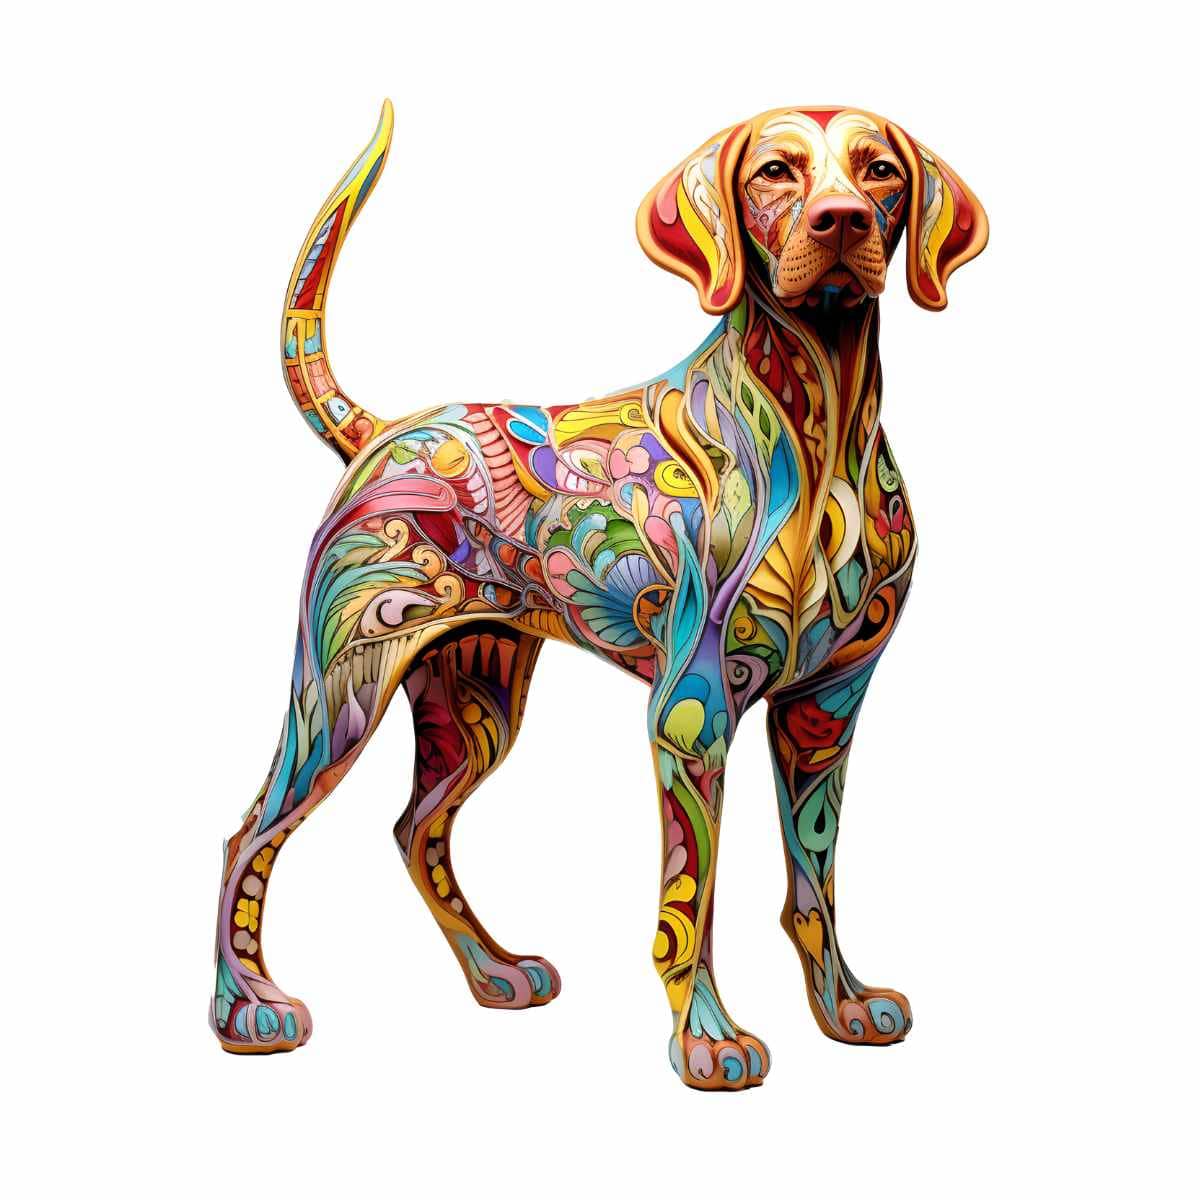 Animal Jigsaw Puzzle > Wooden Jigsaw Puzzle > Jigsaw Puzzle A4 Vizsla Dog - Jigsaw Puzzle